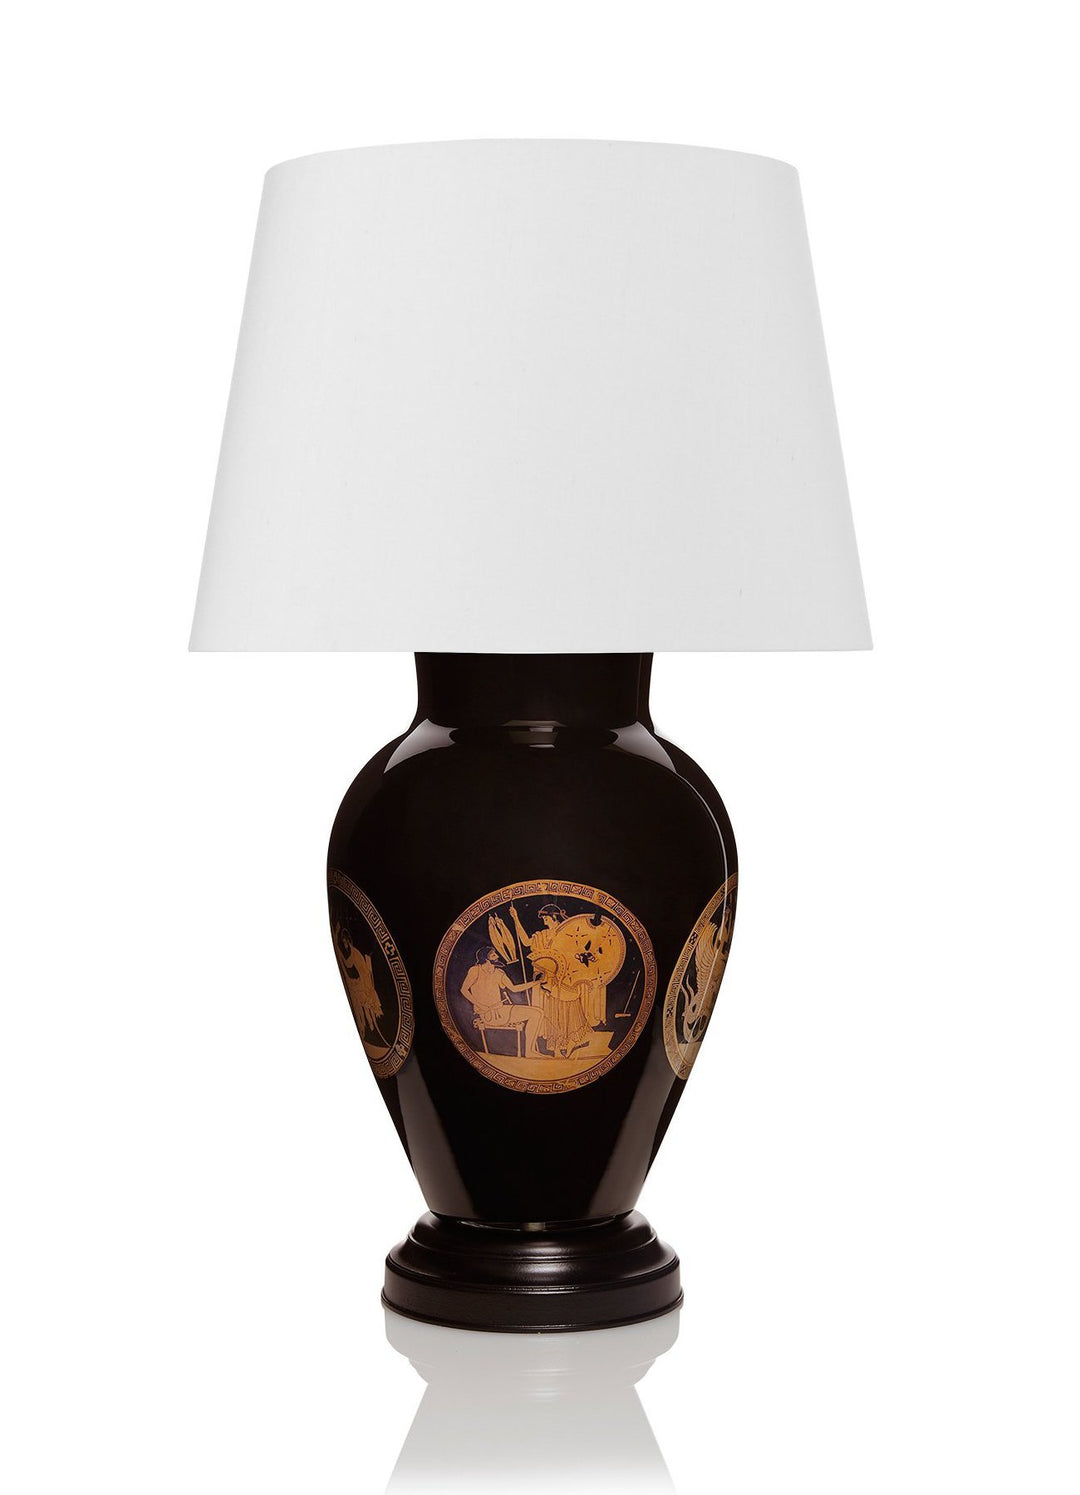 Limited Edition Eros Large Table Lamp